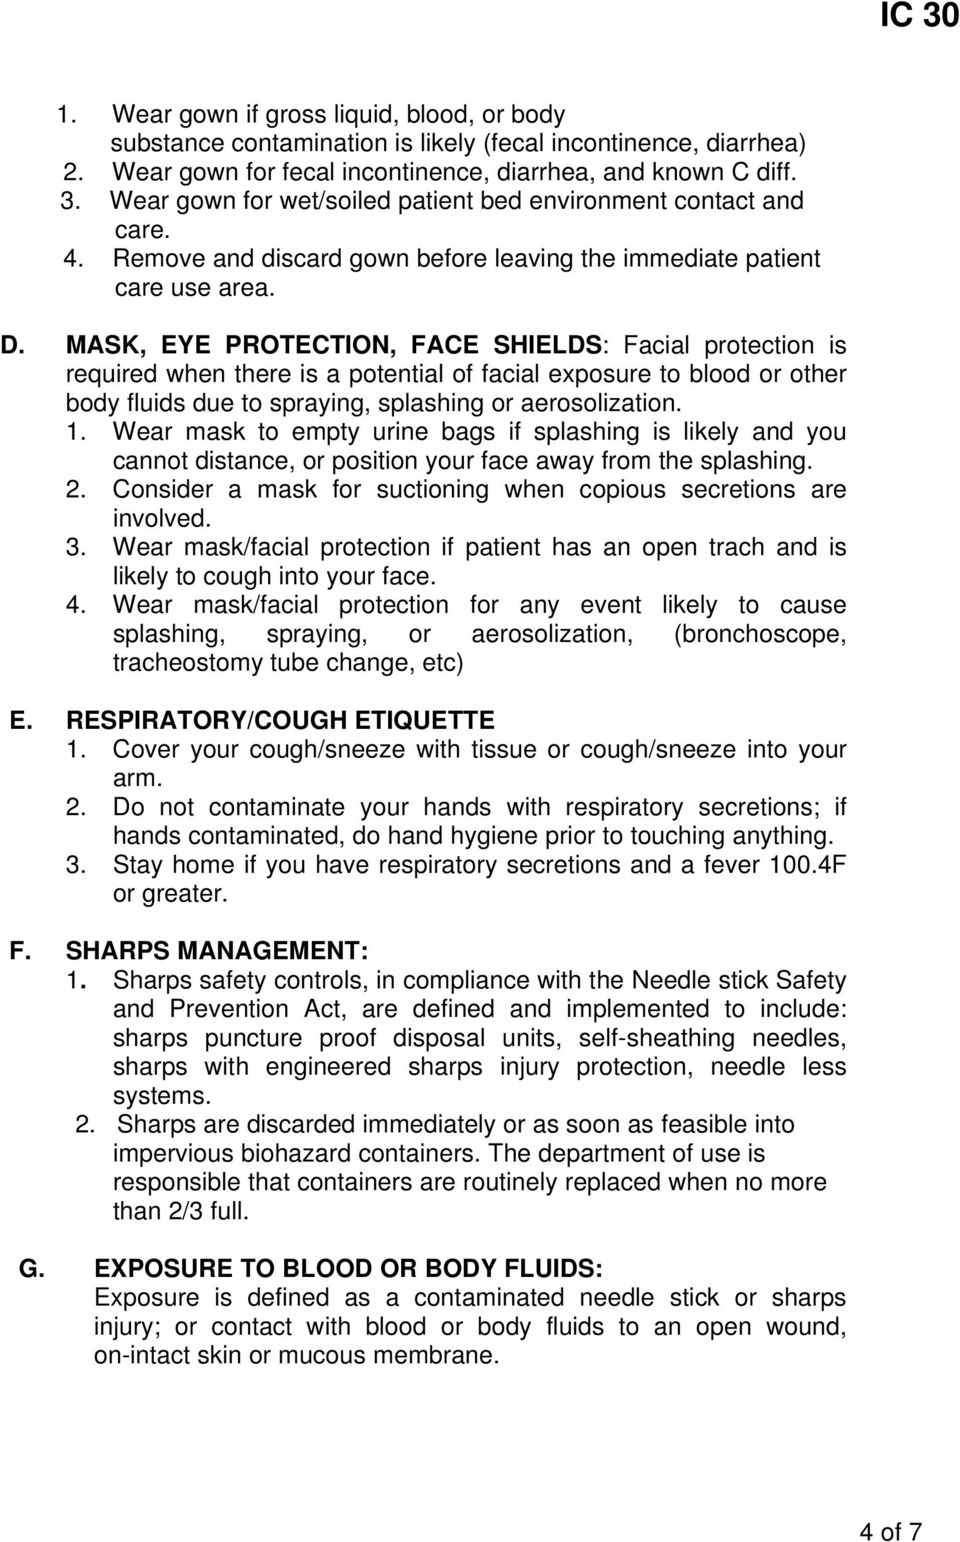 MASK, EYE PROTECTION, FACE SHIELDS: Facial protection is required when there is a potential of facial exposure to blood or other body fluids due to spraying, splashing or aerosolization. 1.